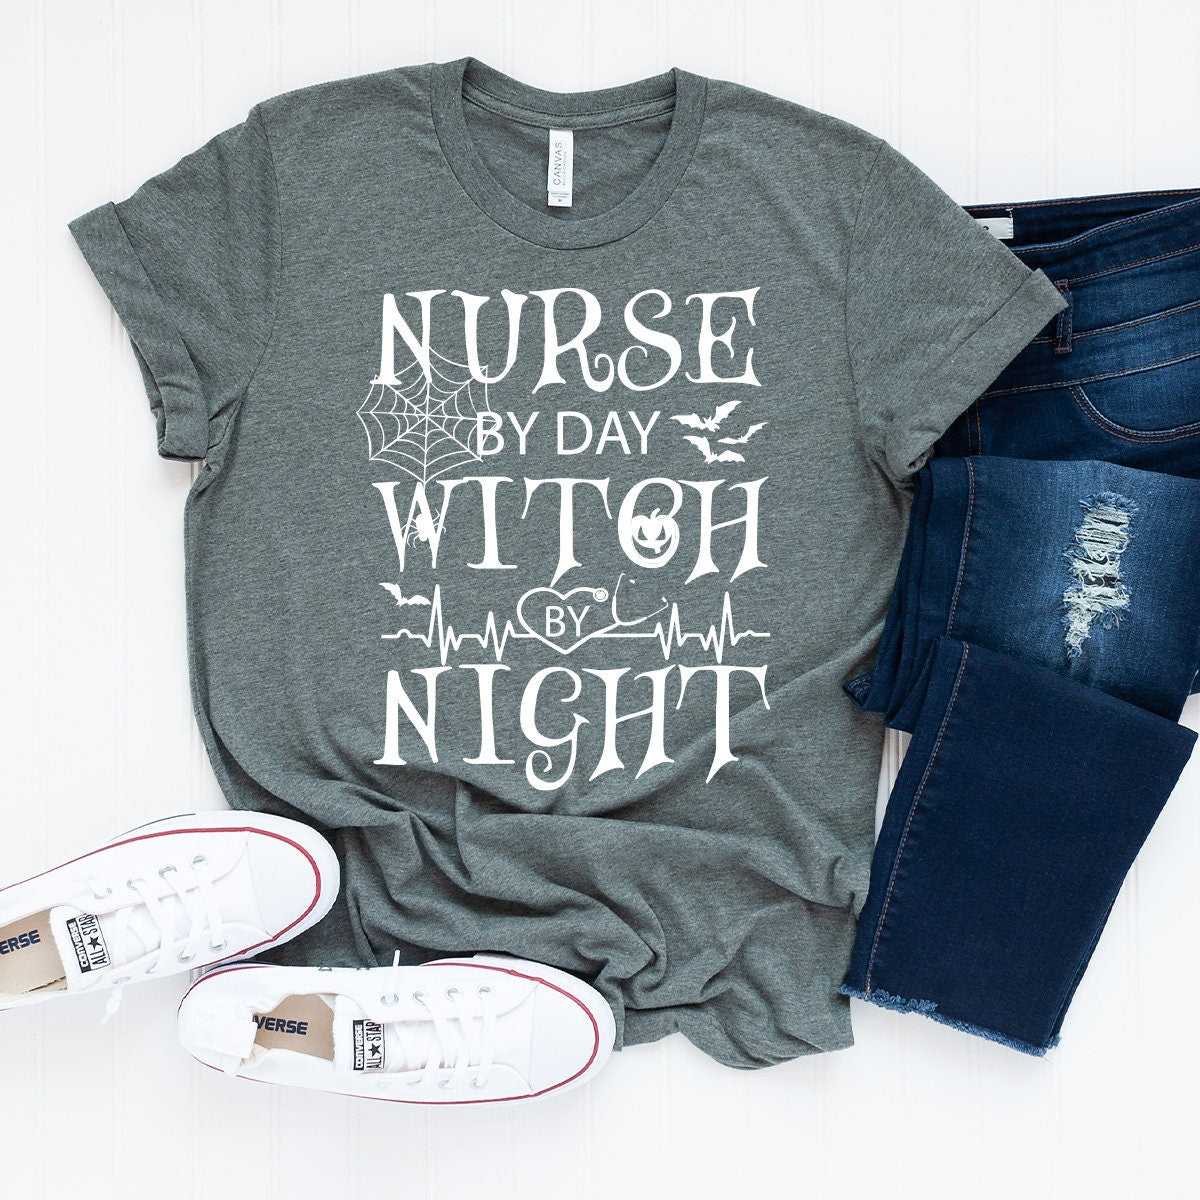 Nurse By Day Witch By Night shirt, Nurse Halloween Tshirt, Nurse Witch Shirt, Witch Sisters Tee, Halloween Graphic Tee, Fall Tshirt - Fastdeliverytees.com